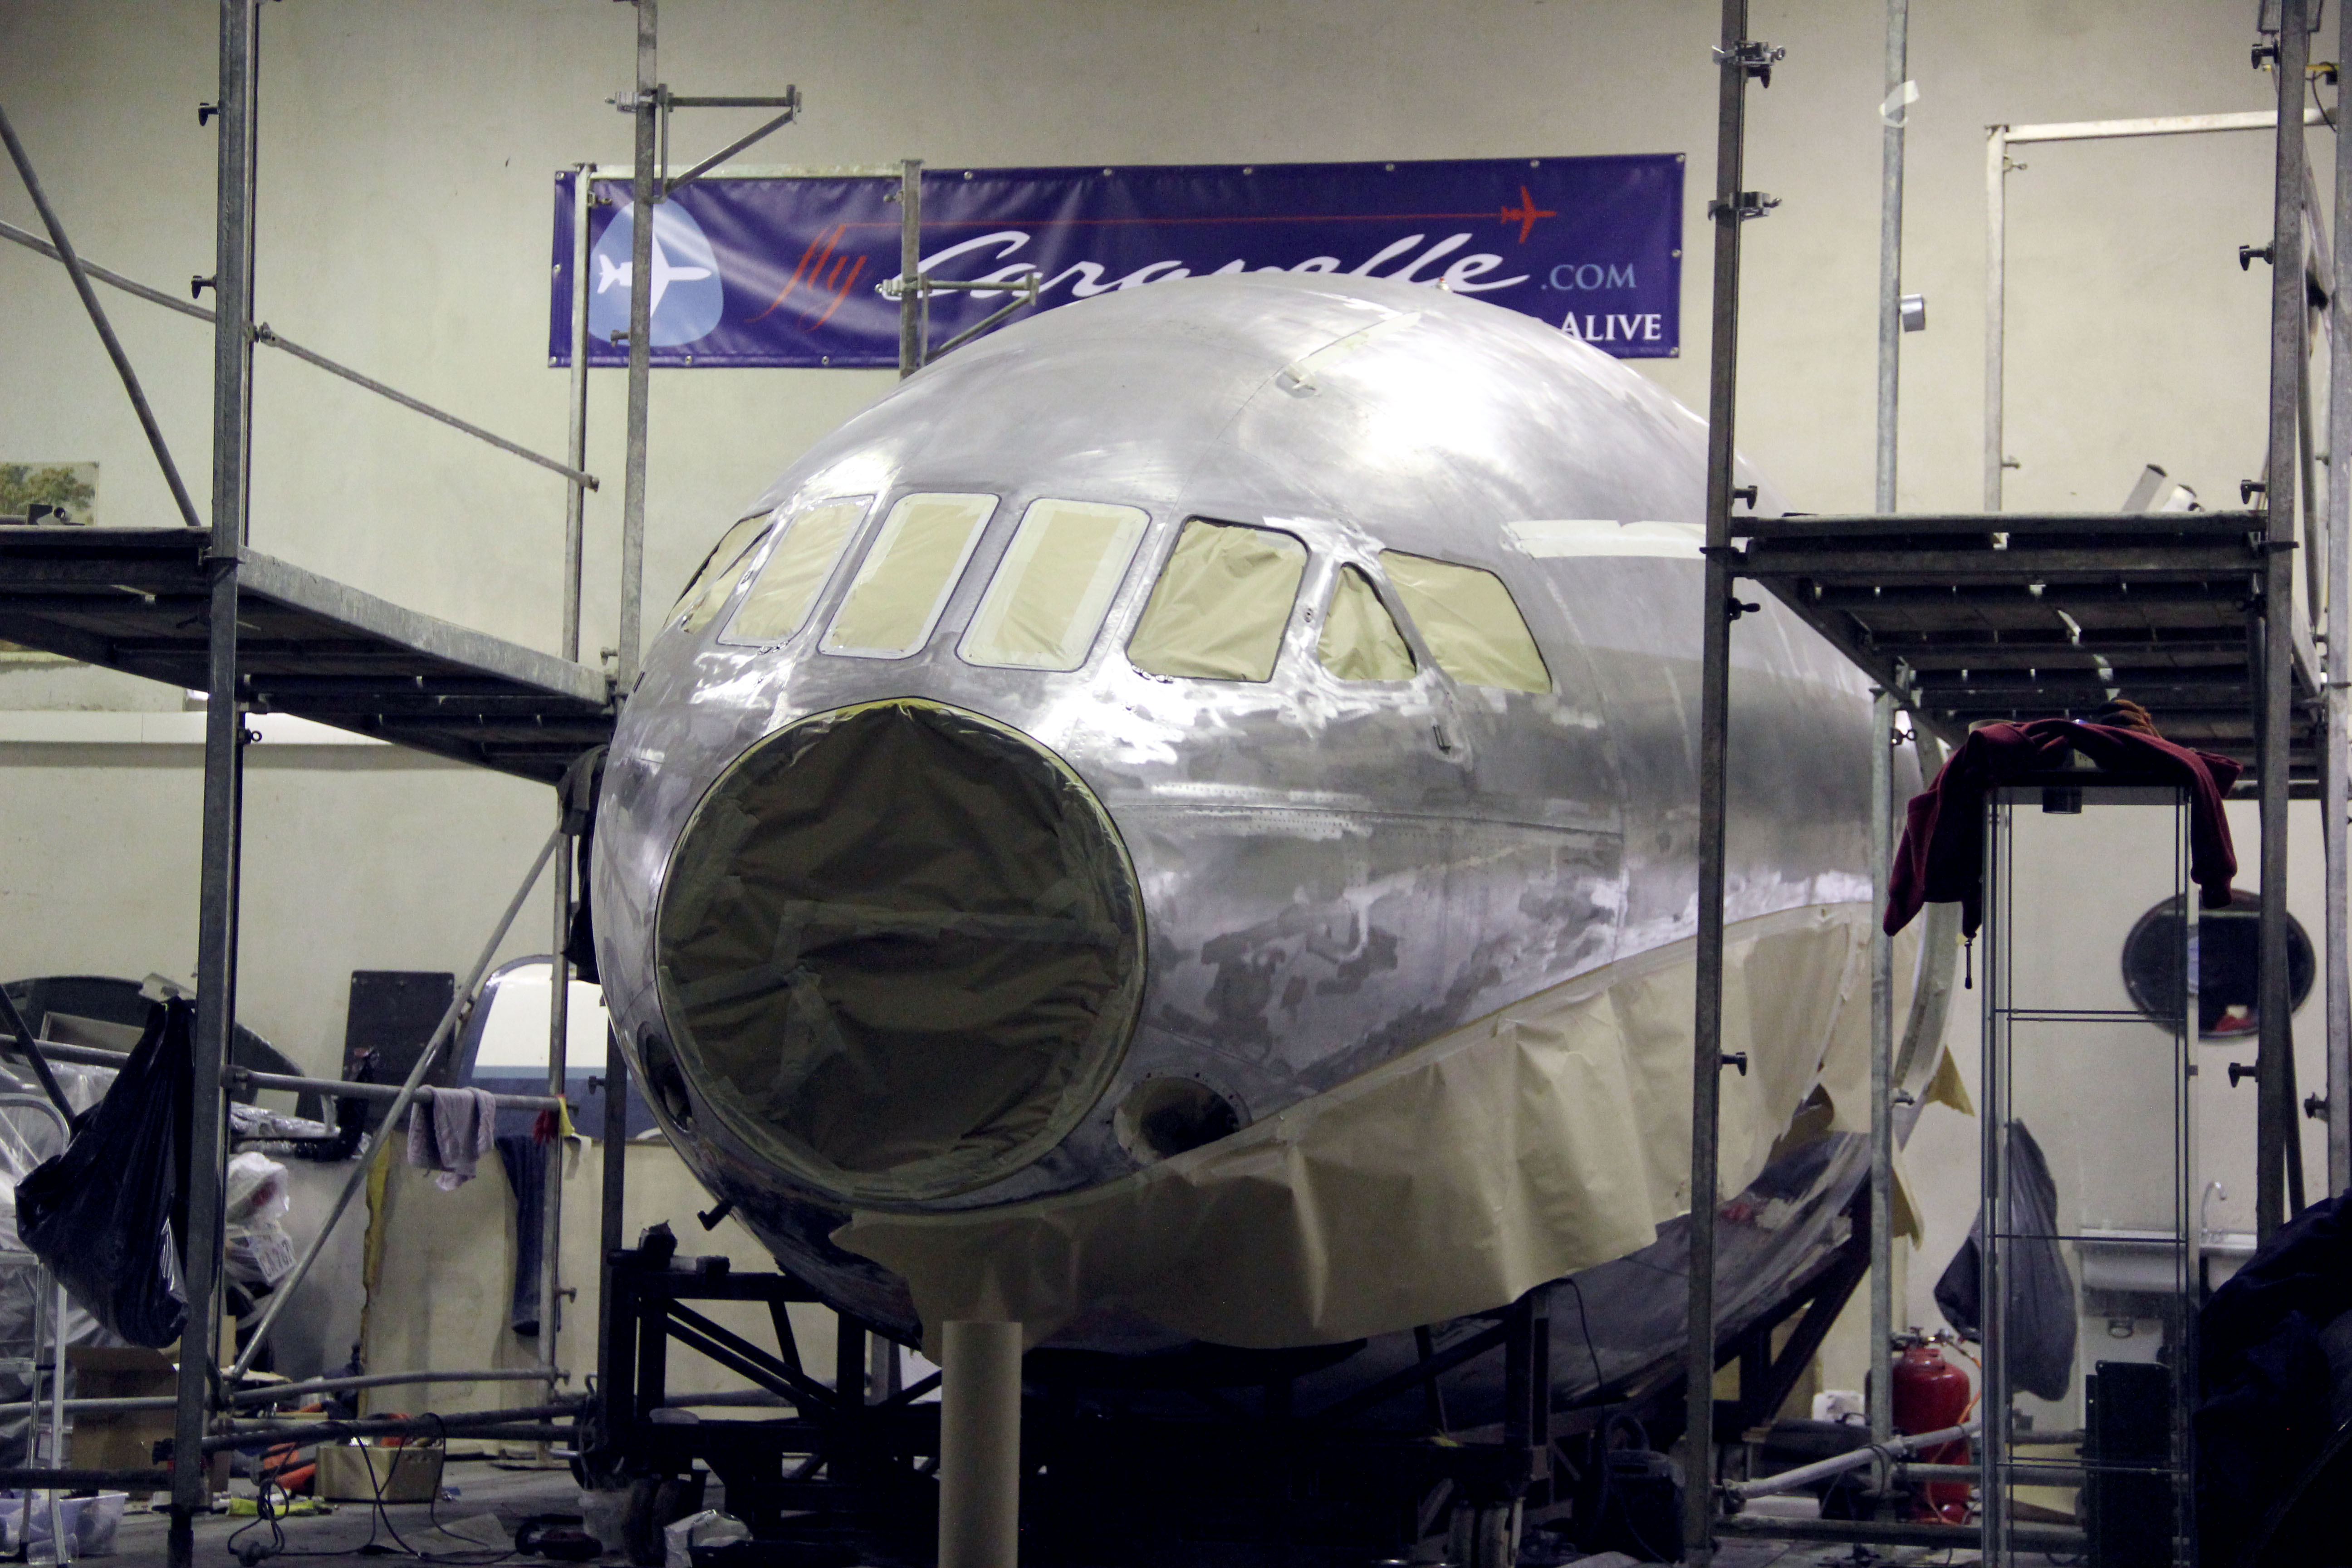 Nils Andersson's Sud Aviation Caravelle cockpit during the restoration process. (photo via Nils Andersson) 